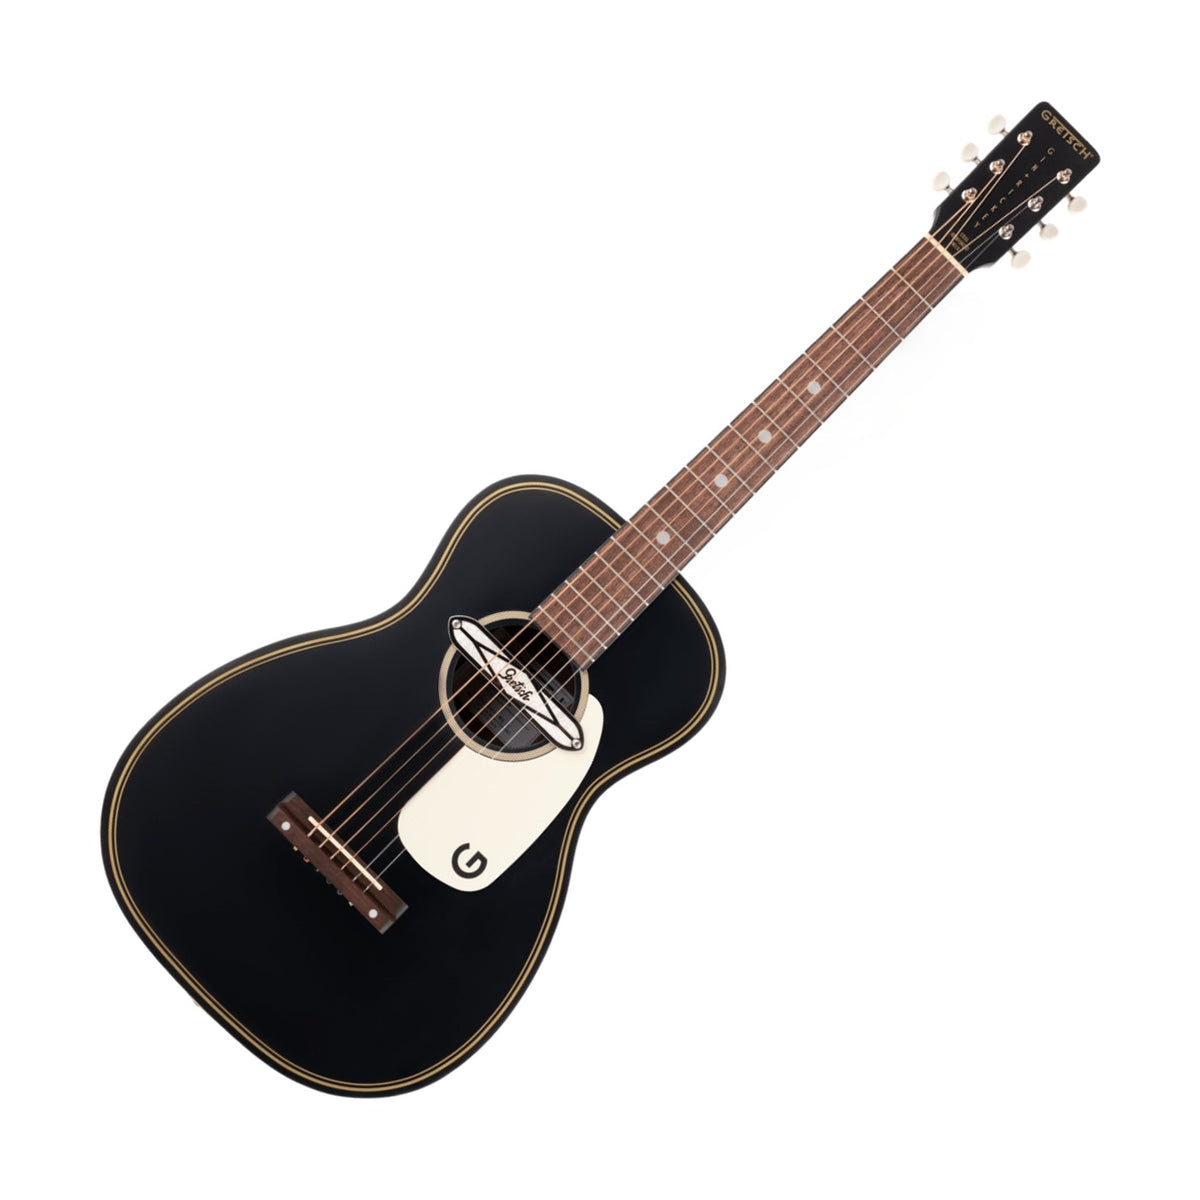 The Gretsch G9520E Gin Rickey Acoustic/Electric Guitar with Deltoluxe Soundhole Pickup is a real gone finger-zinger classic.